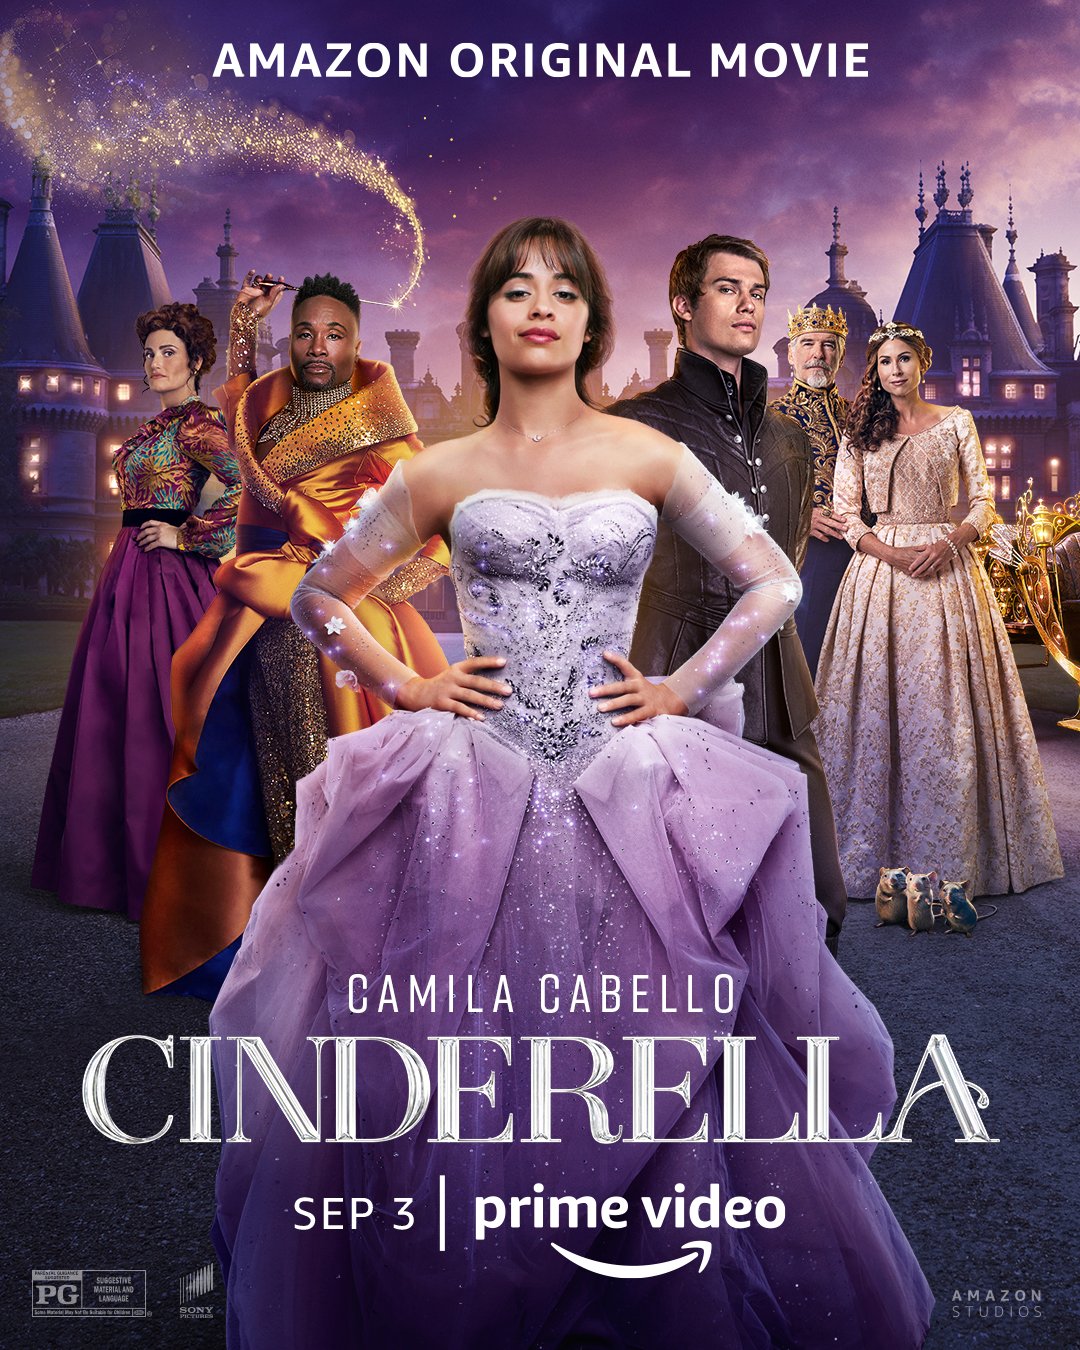 Billy Porter casts a spell as genderless fairy godmother in magical first  Cinderella trailer